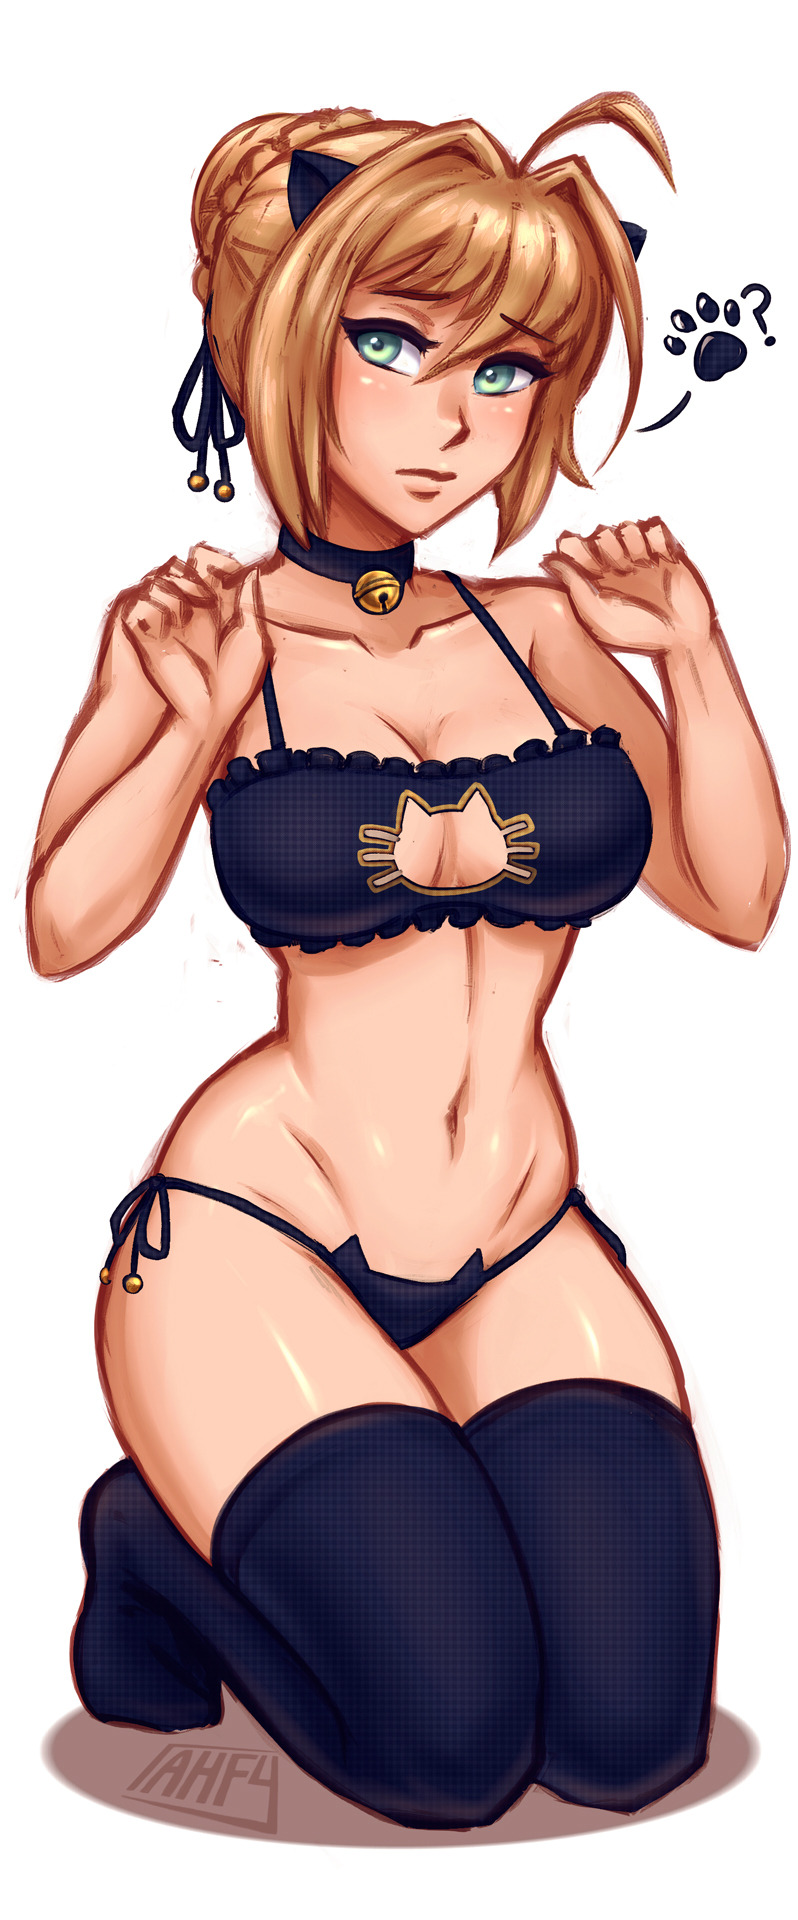 saber from fate/stay night pinup commish! I enjoyed drawing the outfits (•̀ᴗ•́)و